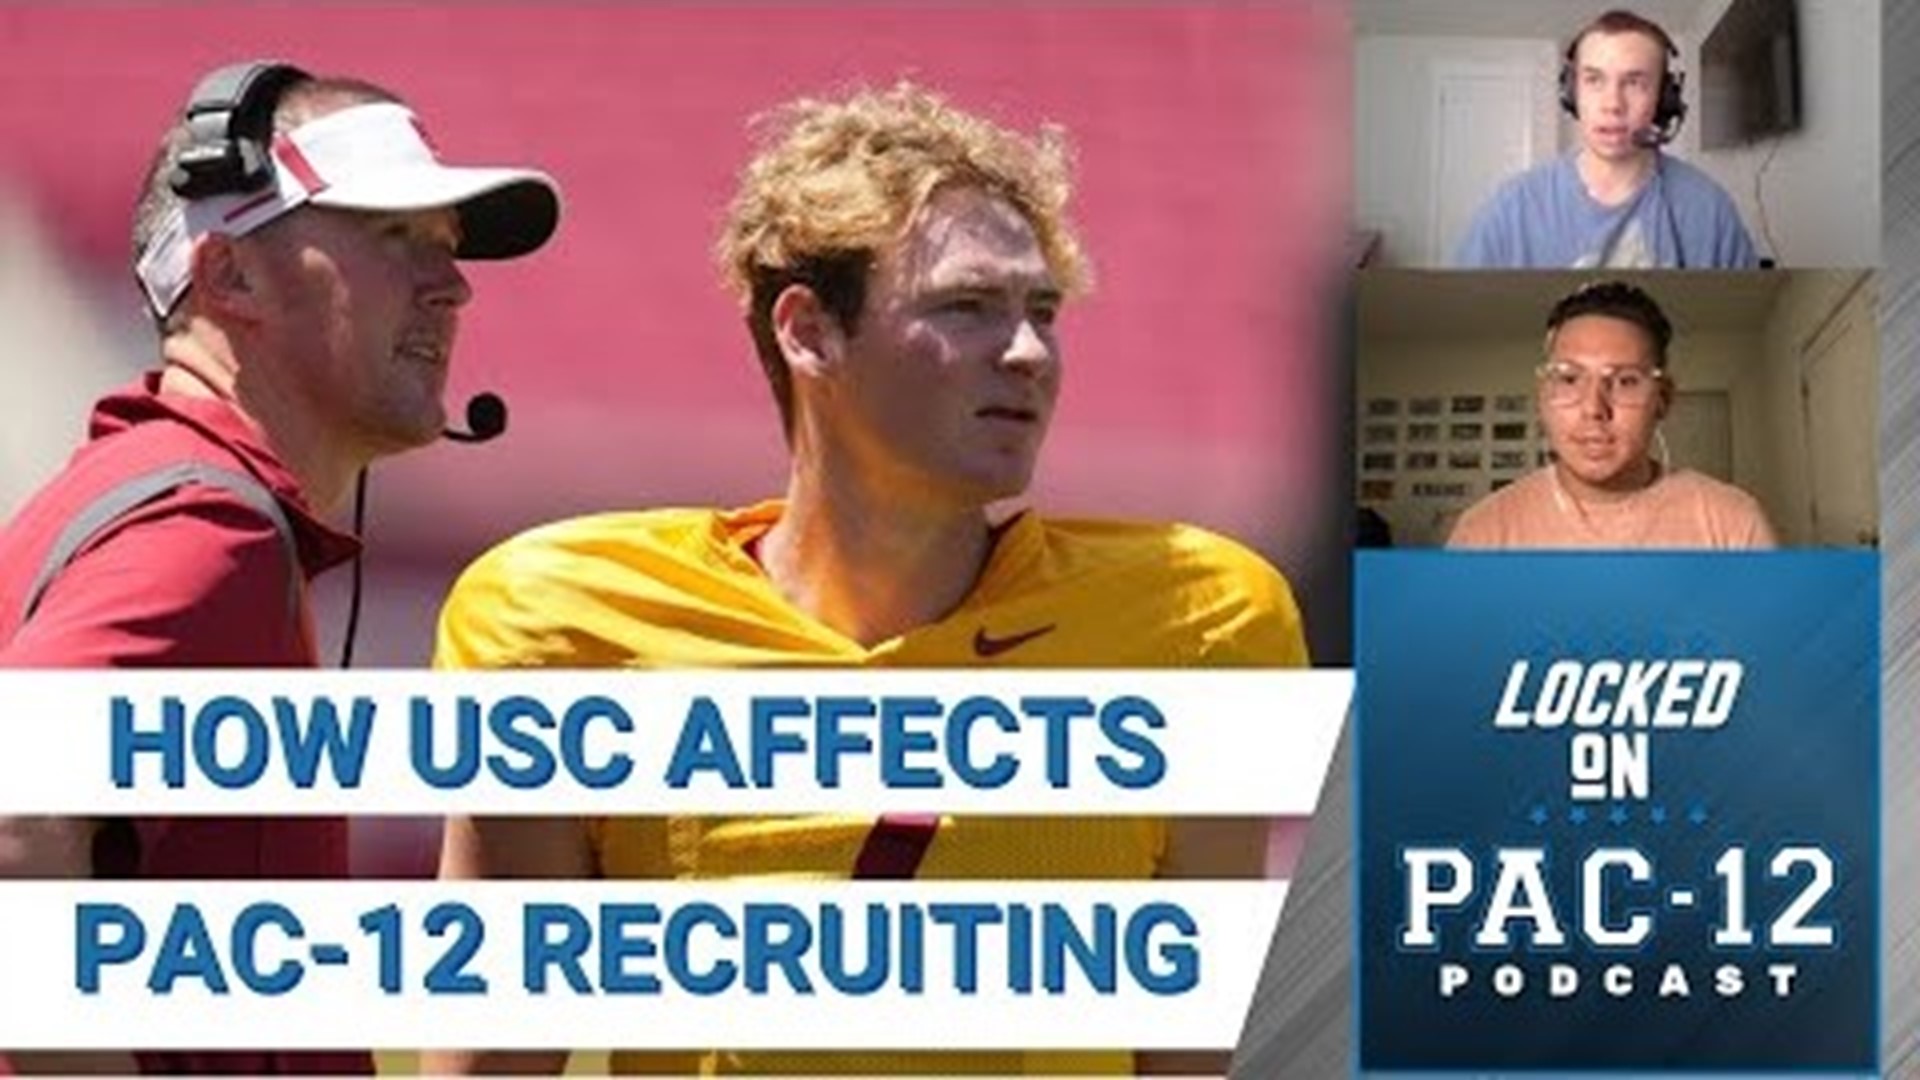 Lincoln Riley's history as a recruiter indicates the Pac-12 recruiting landscape could look very different in a couple of years.